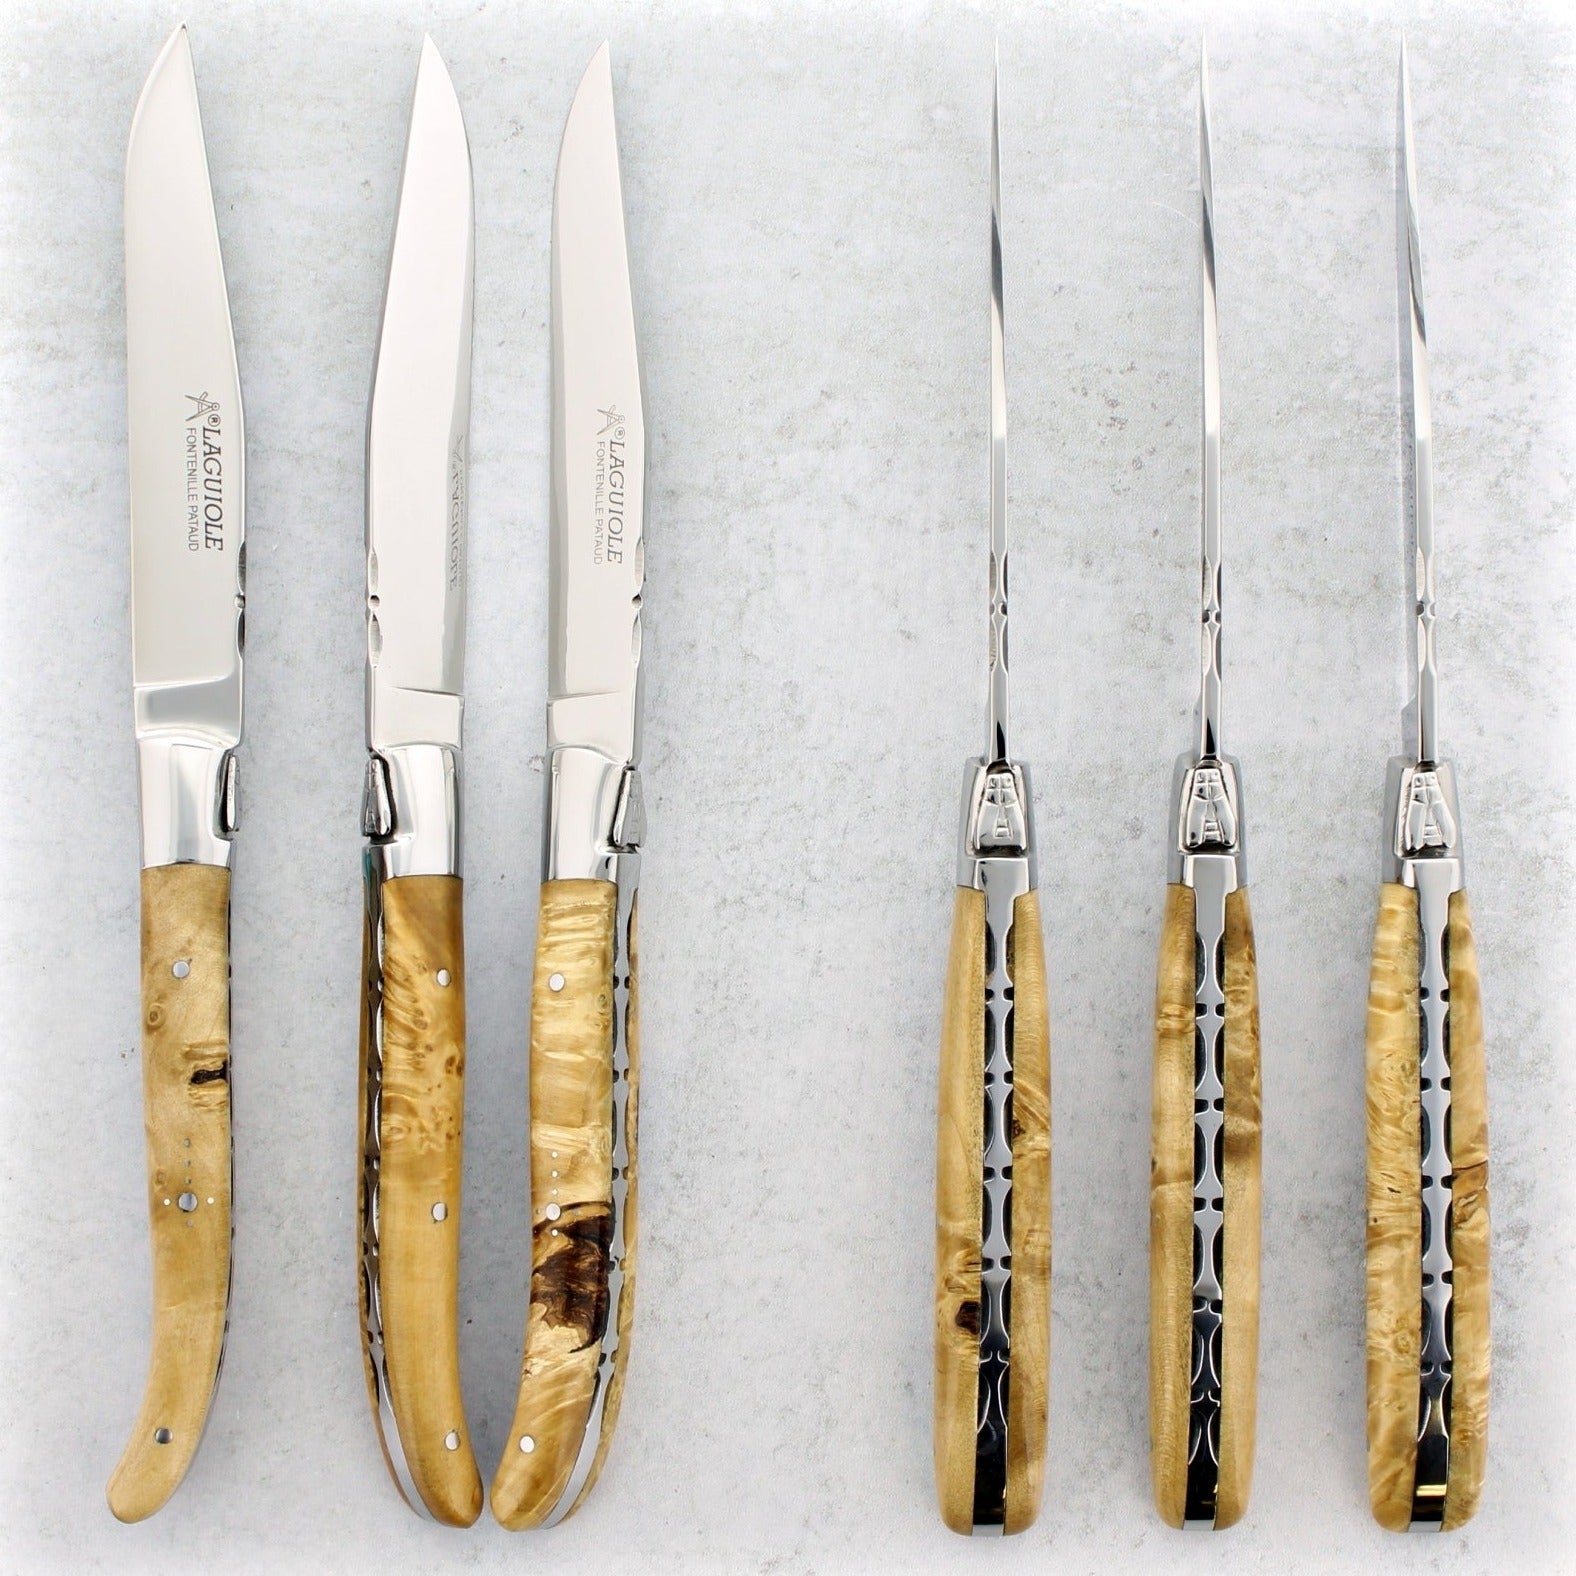 Laguiole Forged Steak Knives Burled Maple